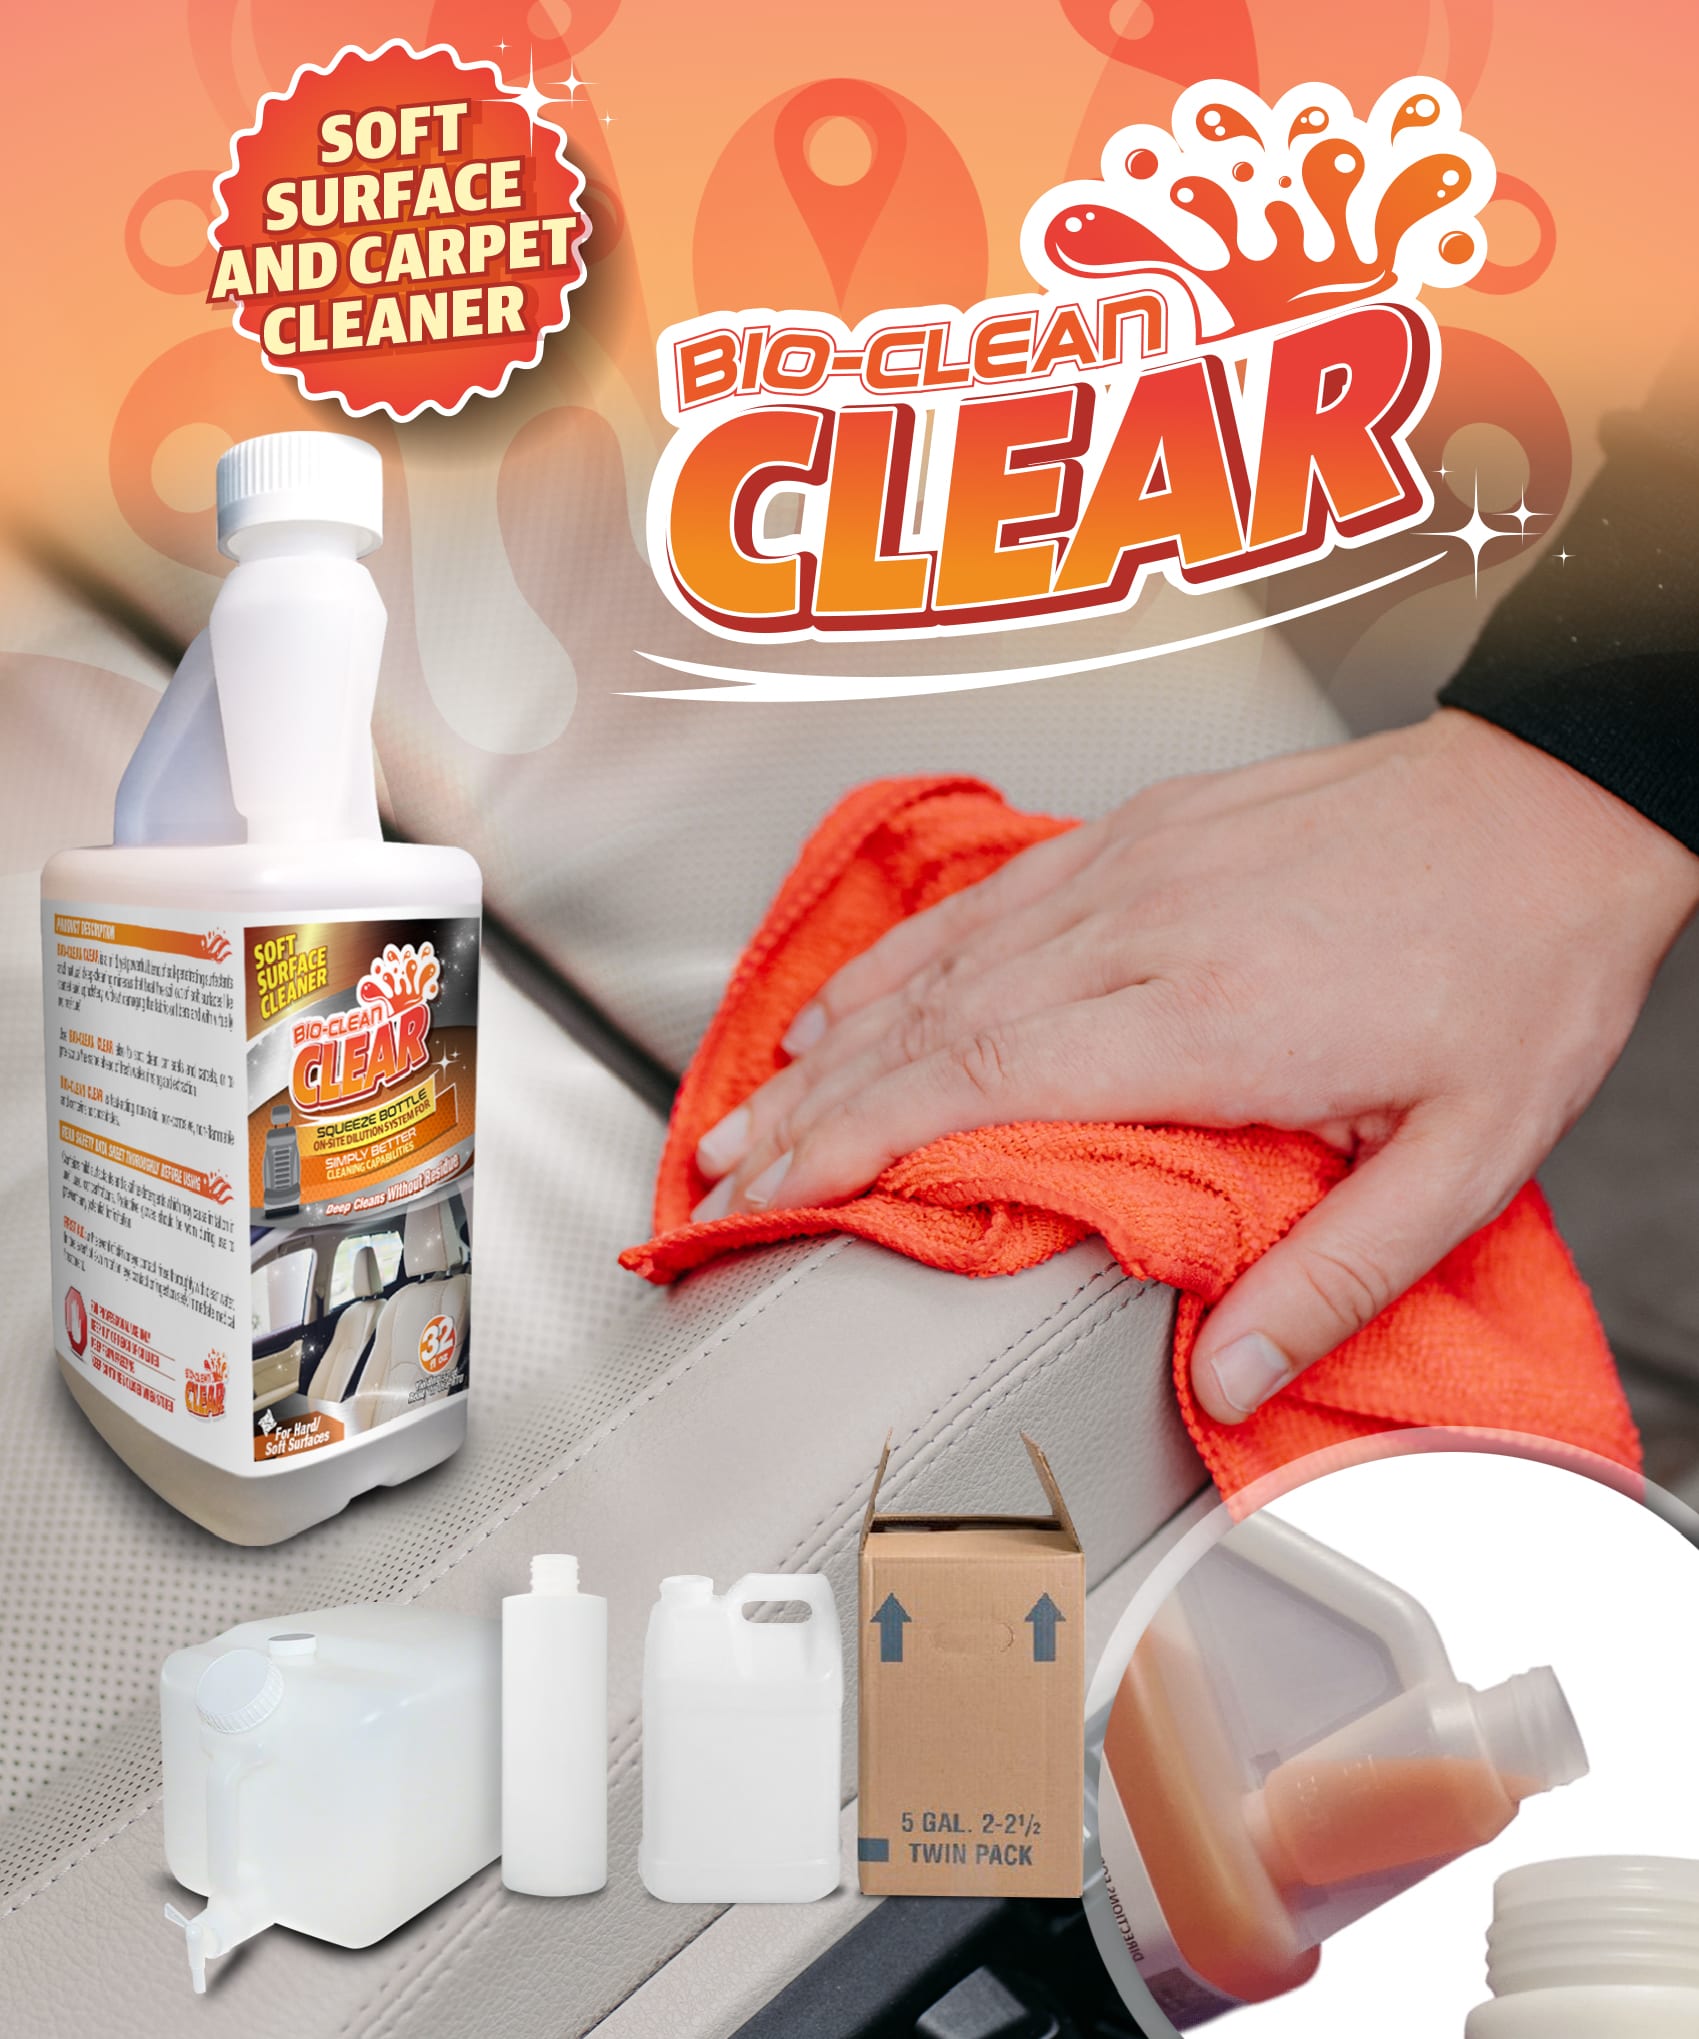 Bio-Clean: CLEAR Soft Surface Cleaner